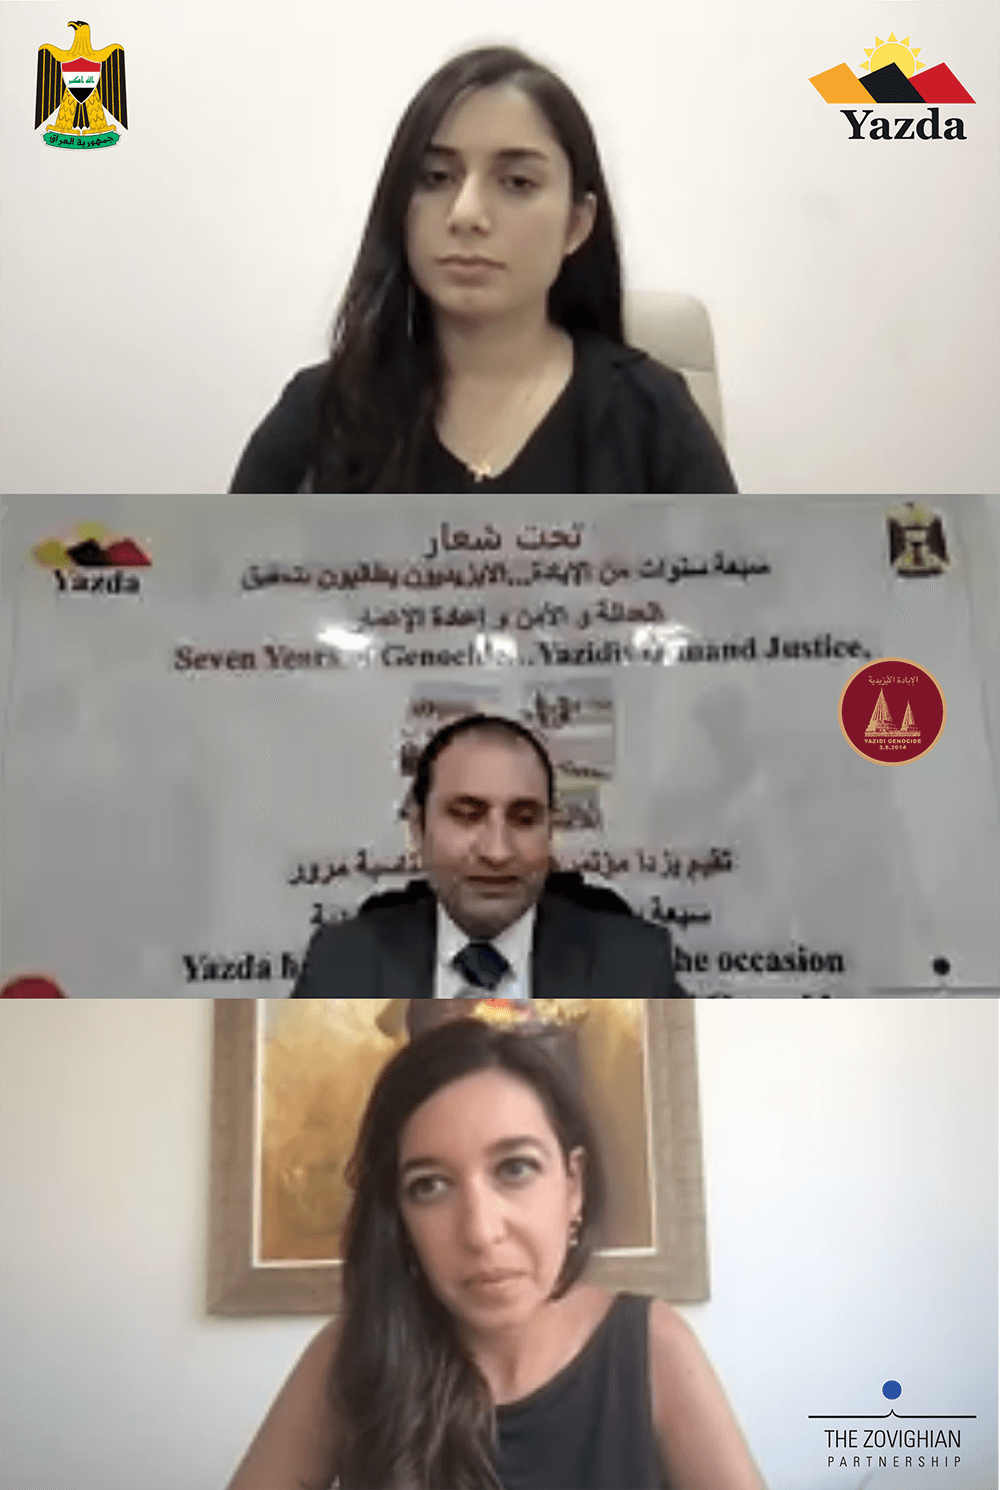 Yazda & The Zovighian Partnnership joint press release on Day Two of the Seventh Annual Commemoration of the Yazidi Genocide